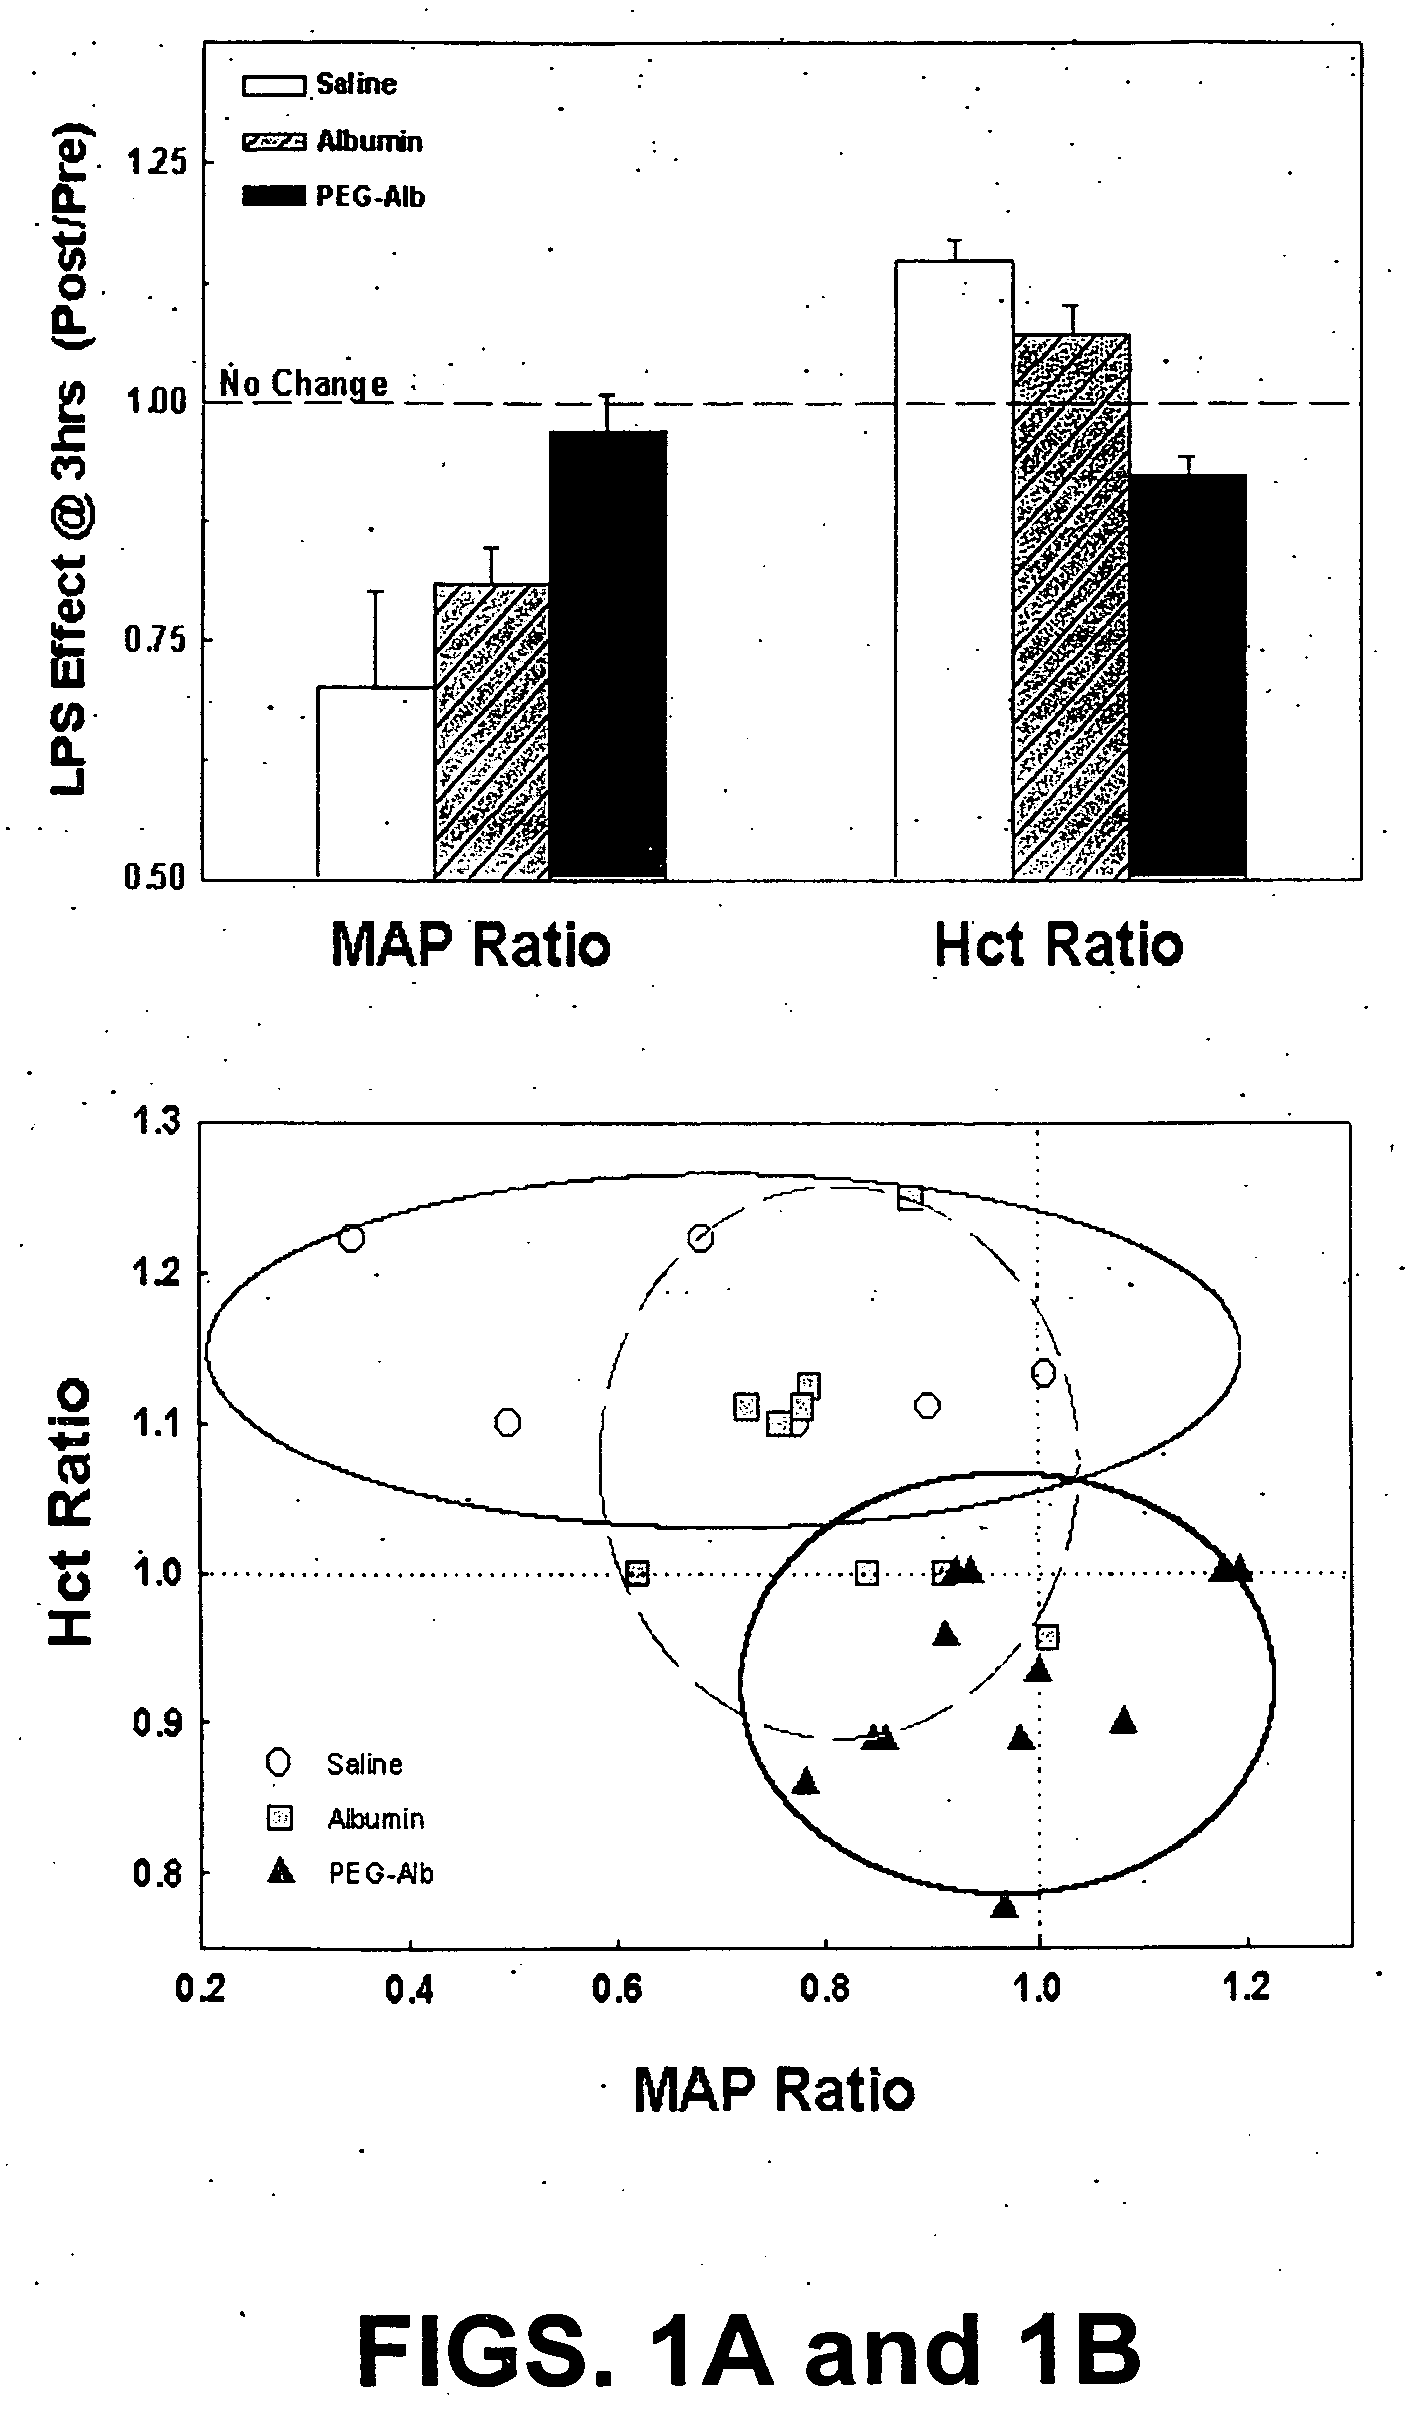 Albumin-based colloid composition and method of use in treating hypovolemia and multiorgan dysfunction